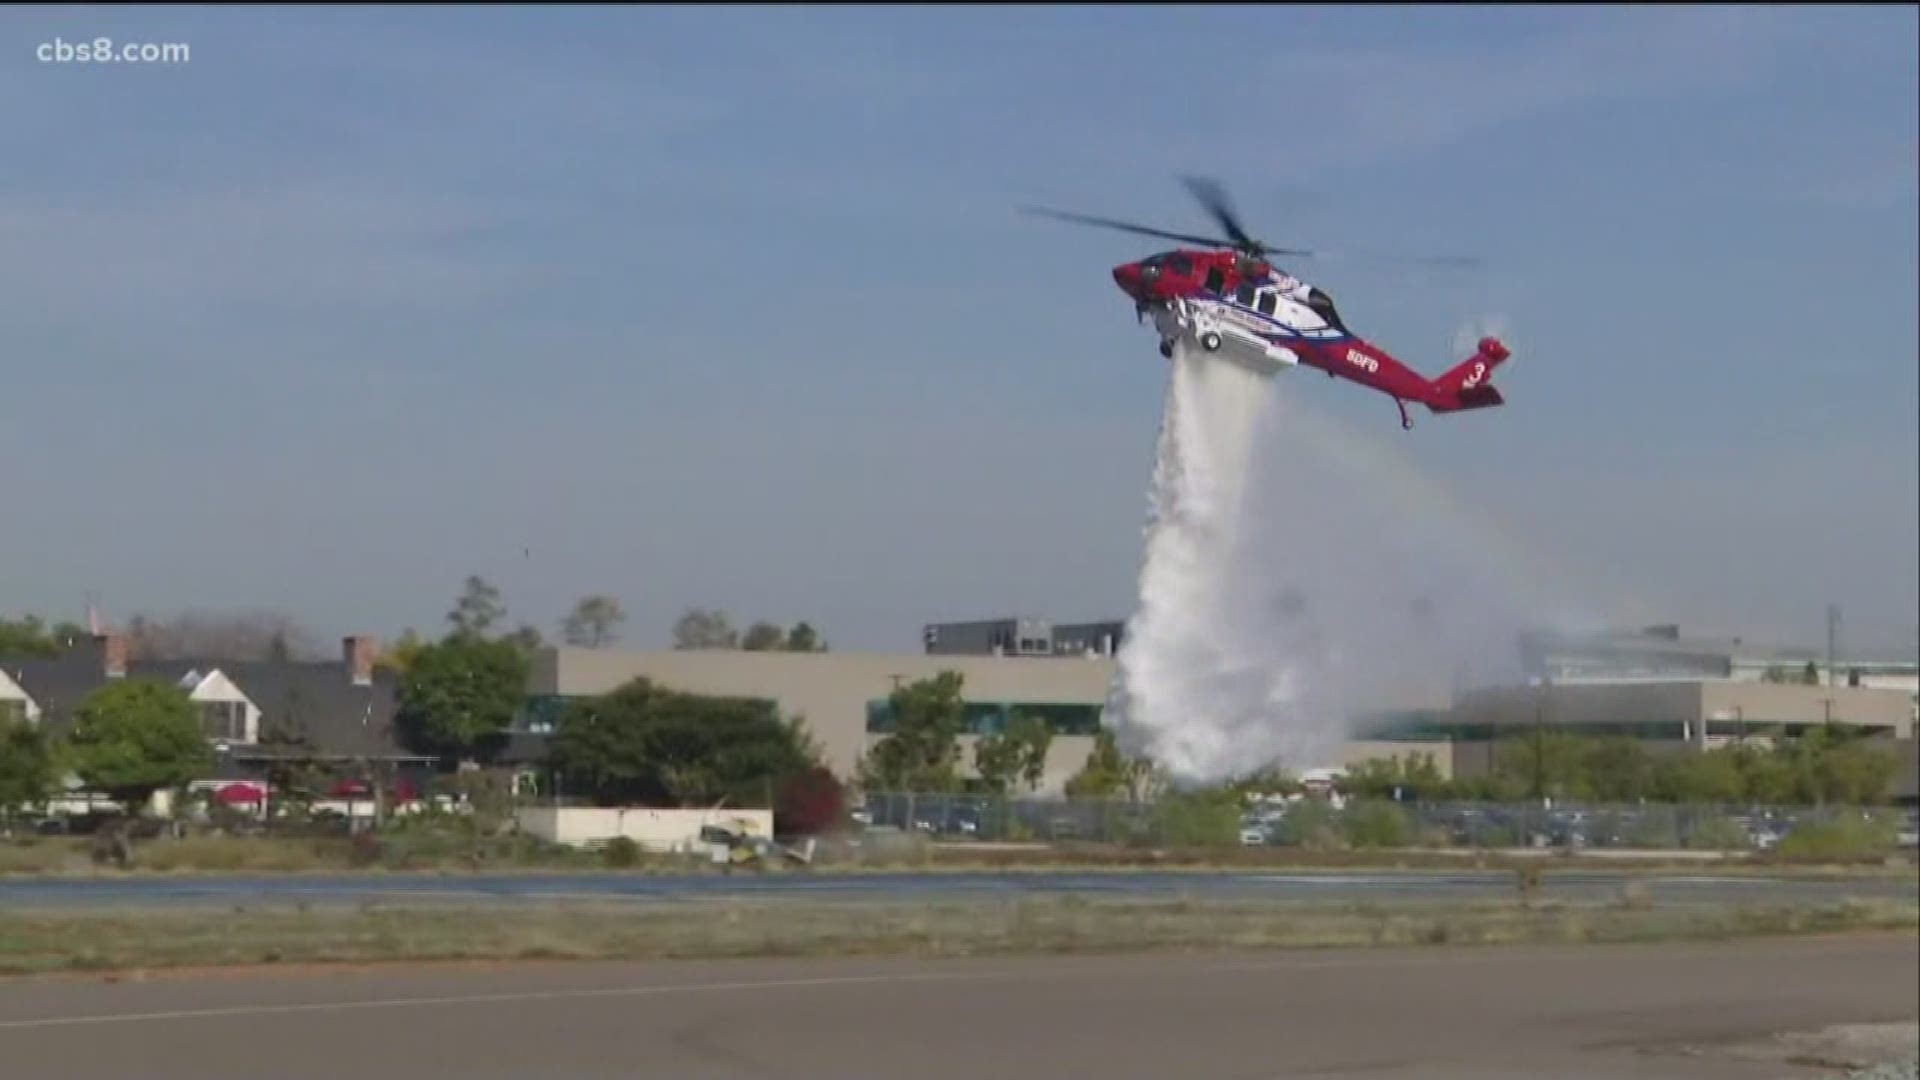 The new helicopter can fly at night and drop 1,000 gallons of water at a time.